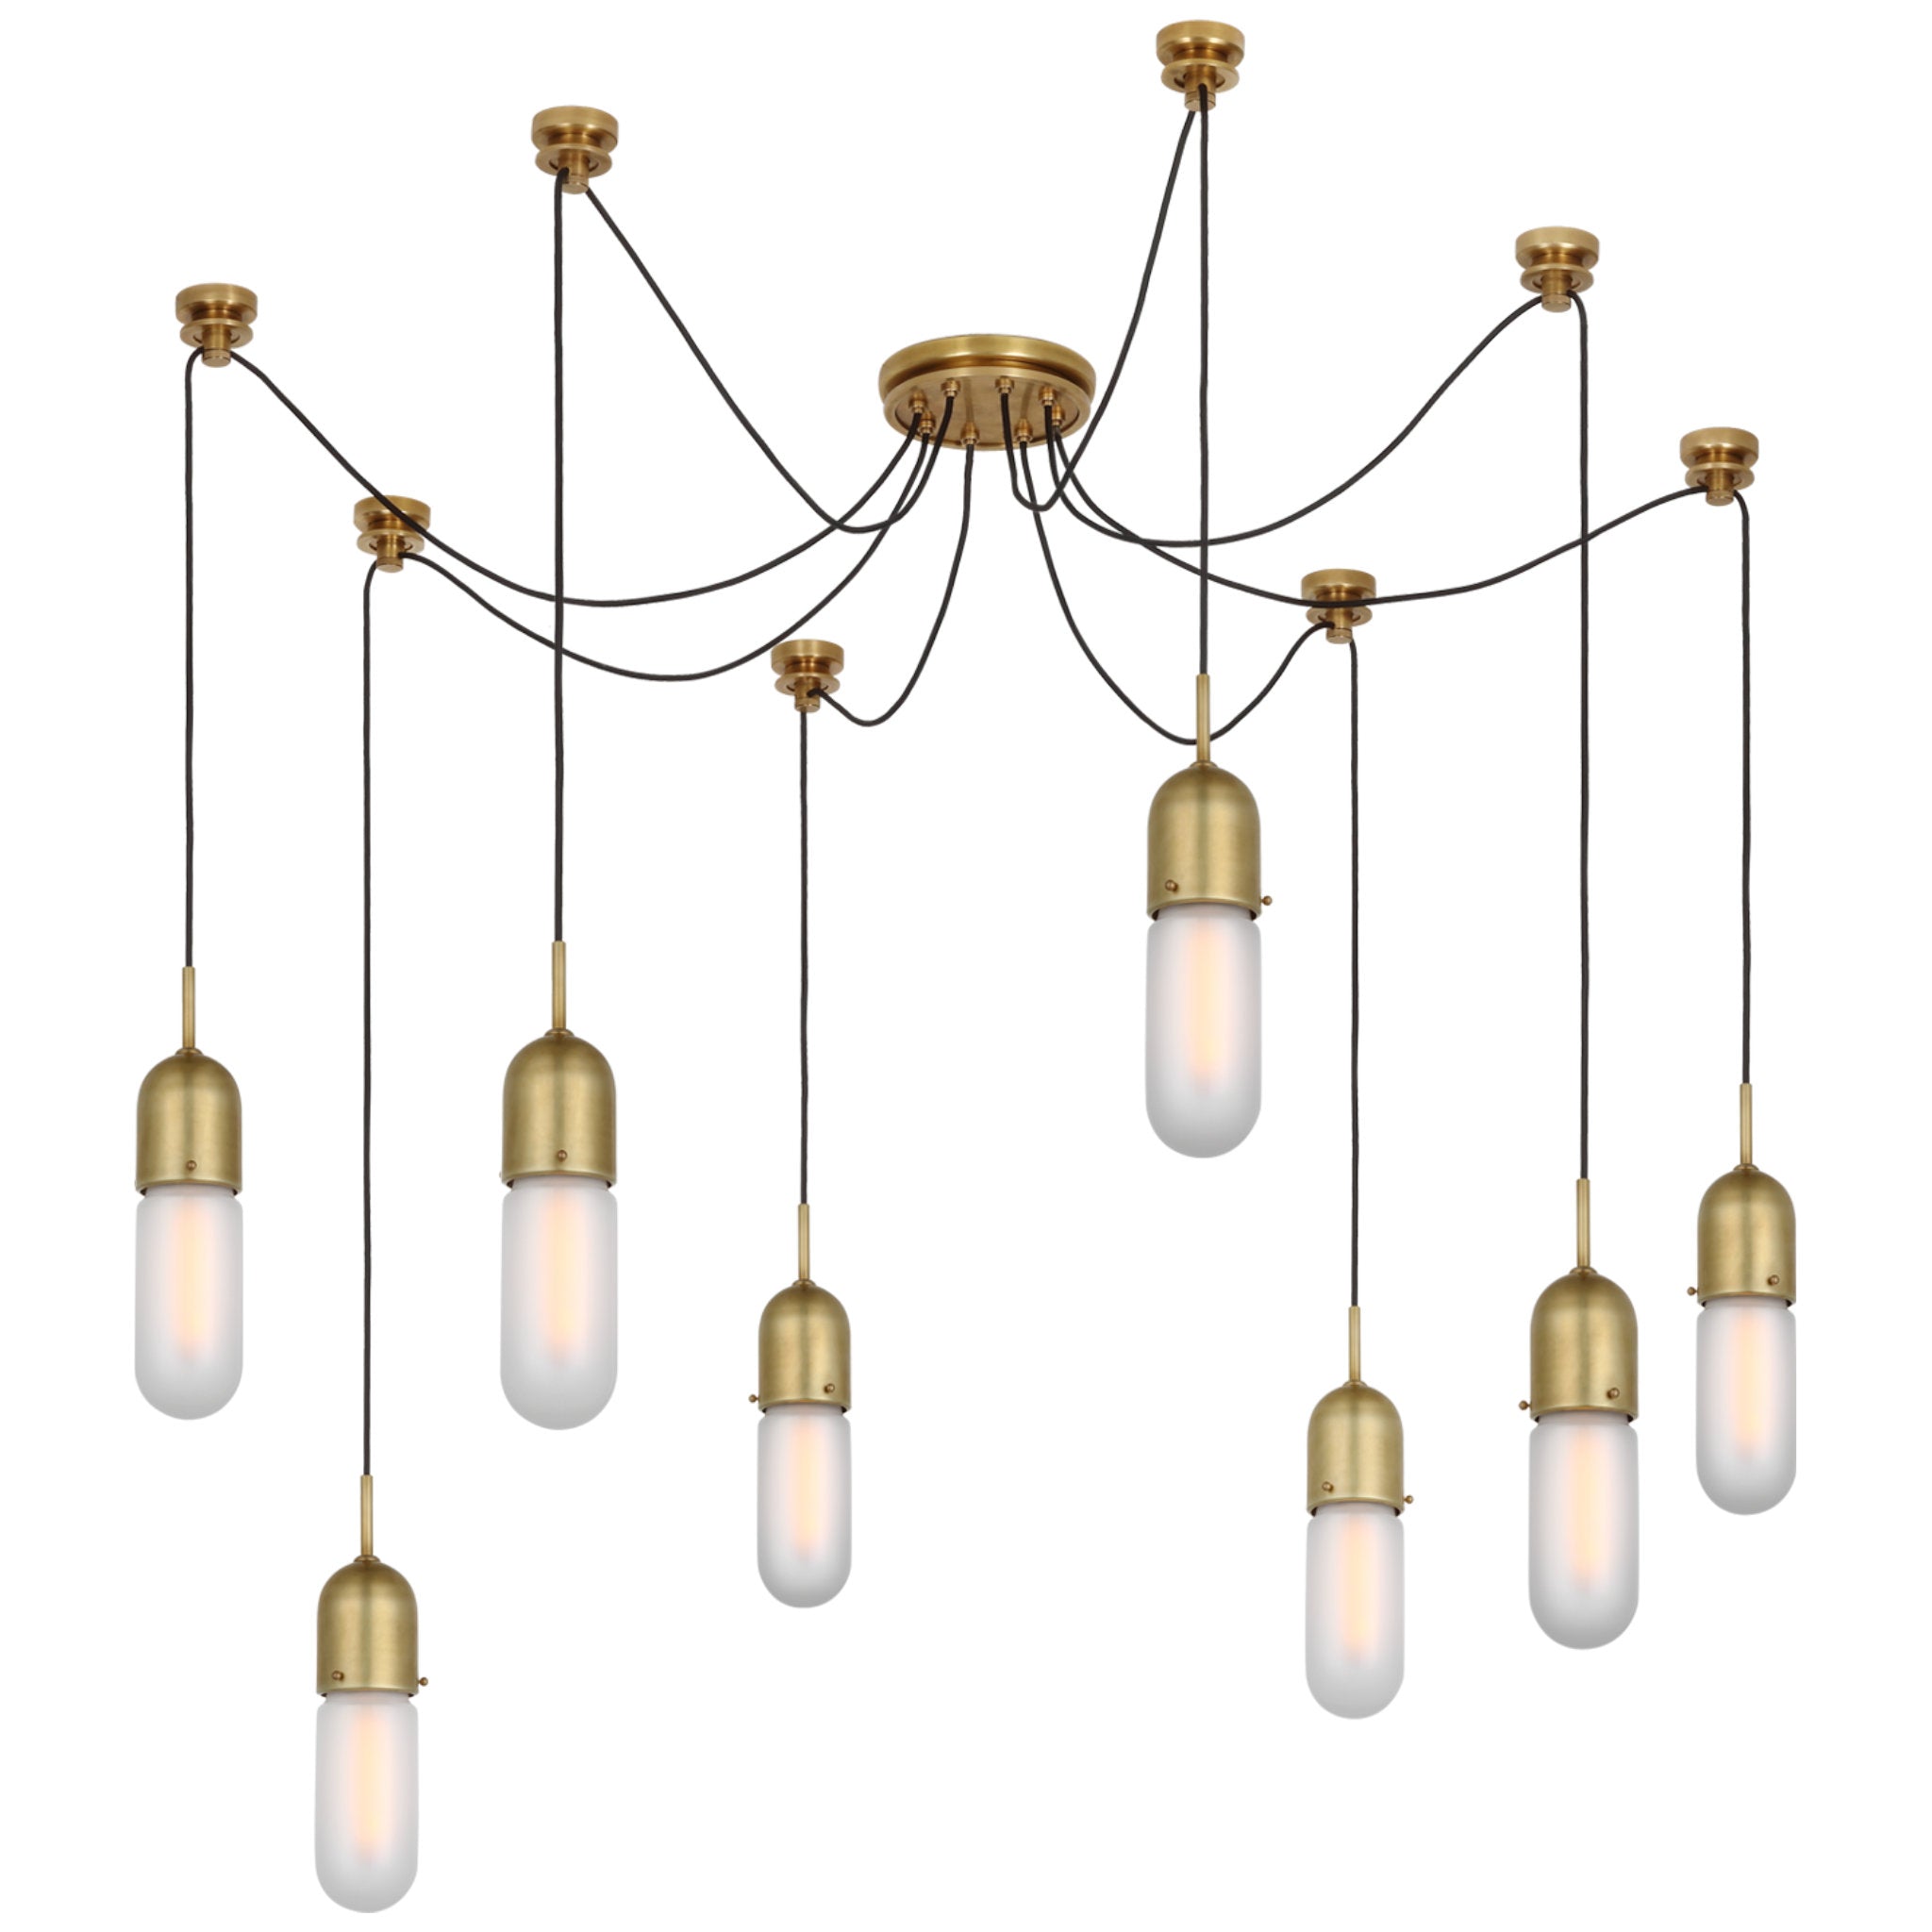 Thomas O'Brien Junio 8-Light Chandelier in Hand-Rubbed Antique Brass with Frosted Glass